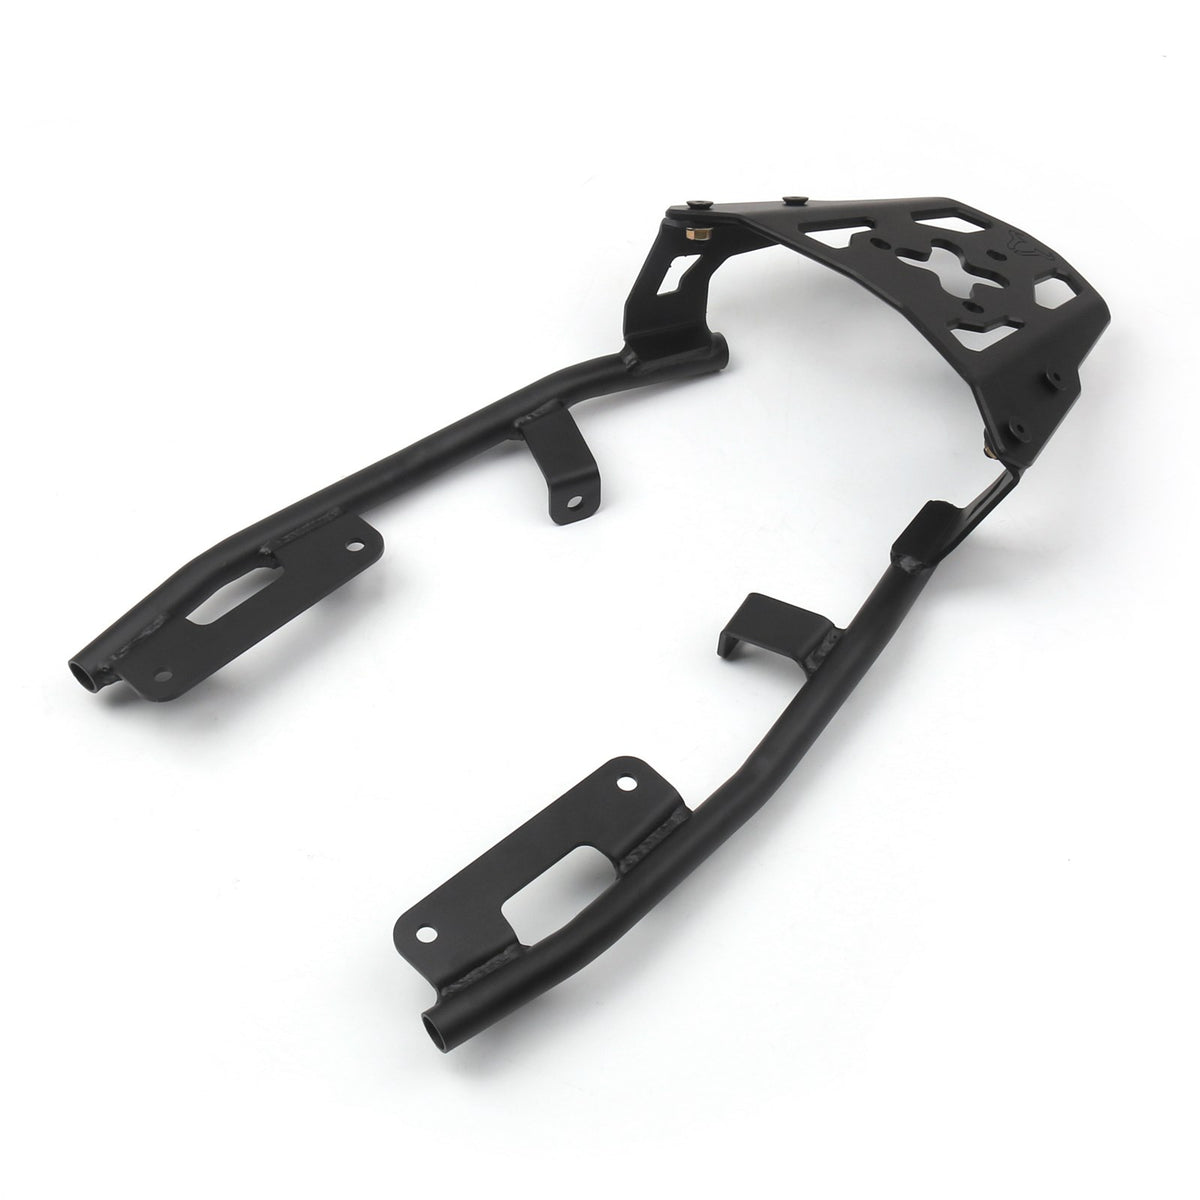 Luggage Rack Rear Carrier Plate kit For Yamaha MT-09 MT 09 2017-2019 Generic FedEx Express Shipping